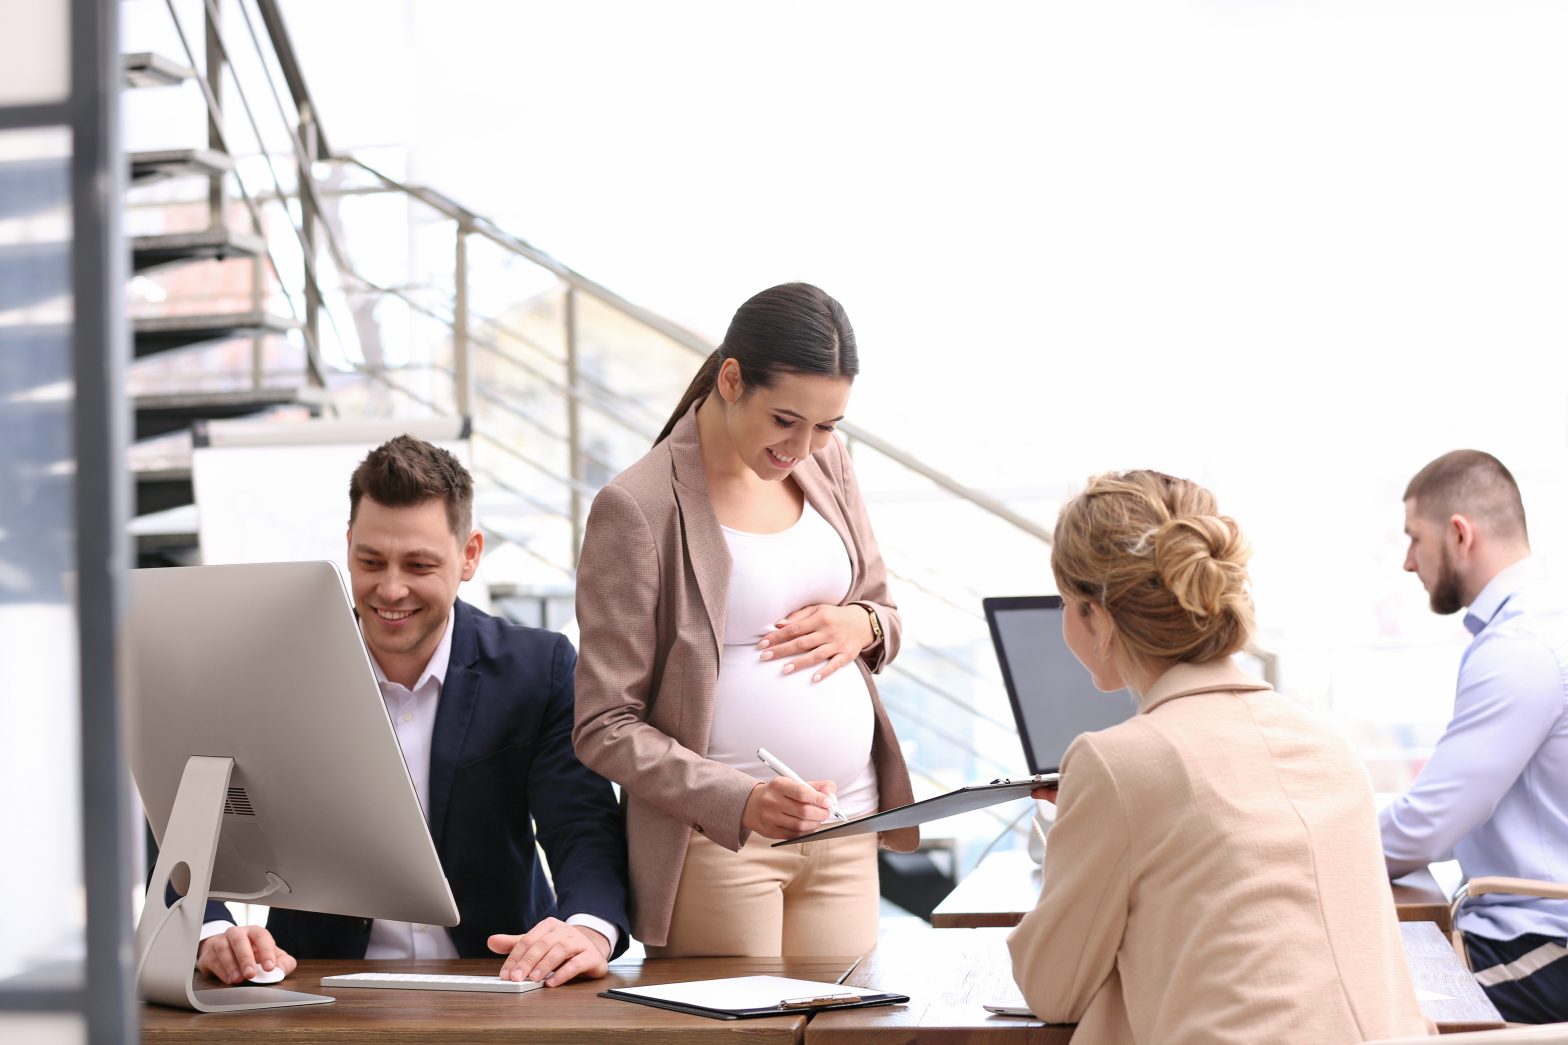 Are You Experiencing Pregnancy Discrimination? Know Your Rights